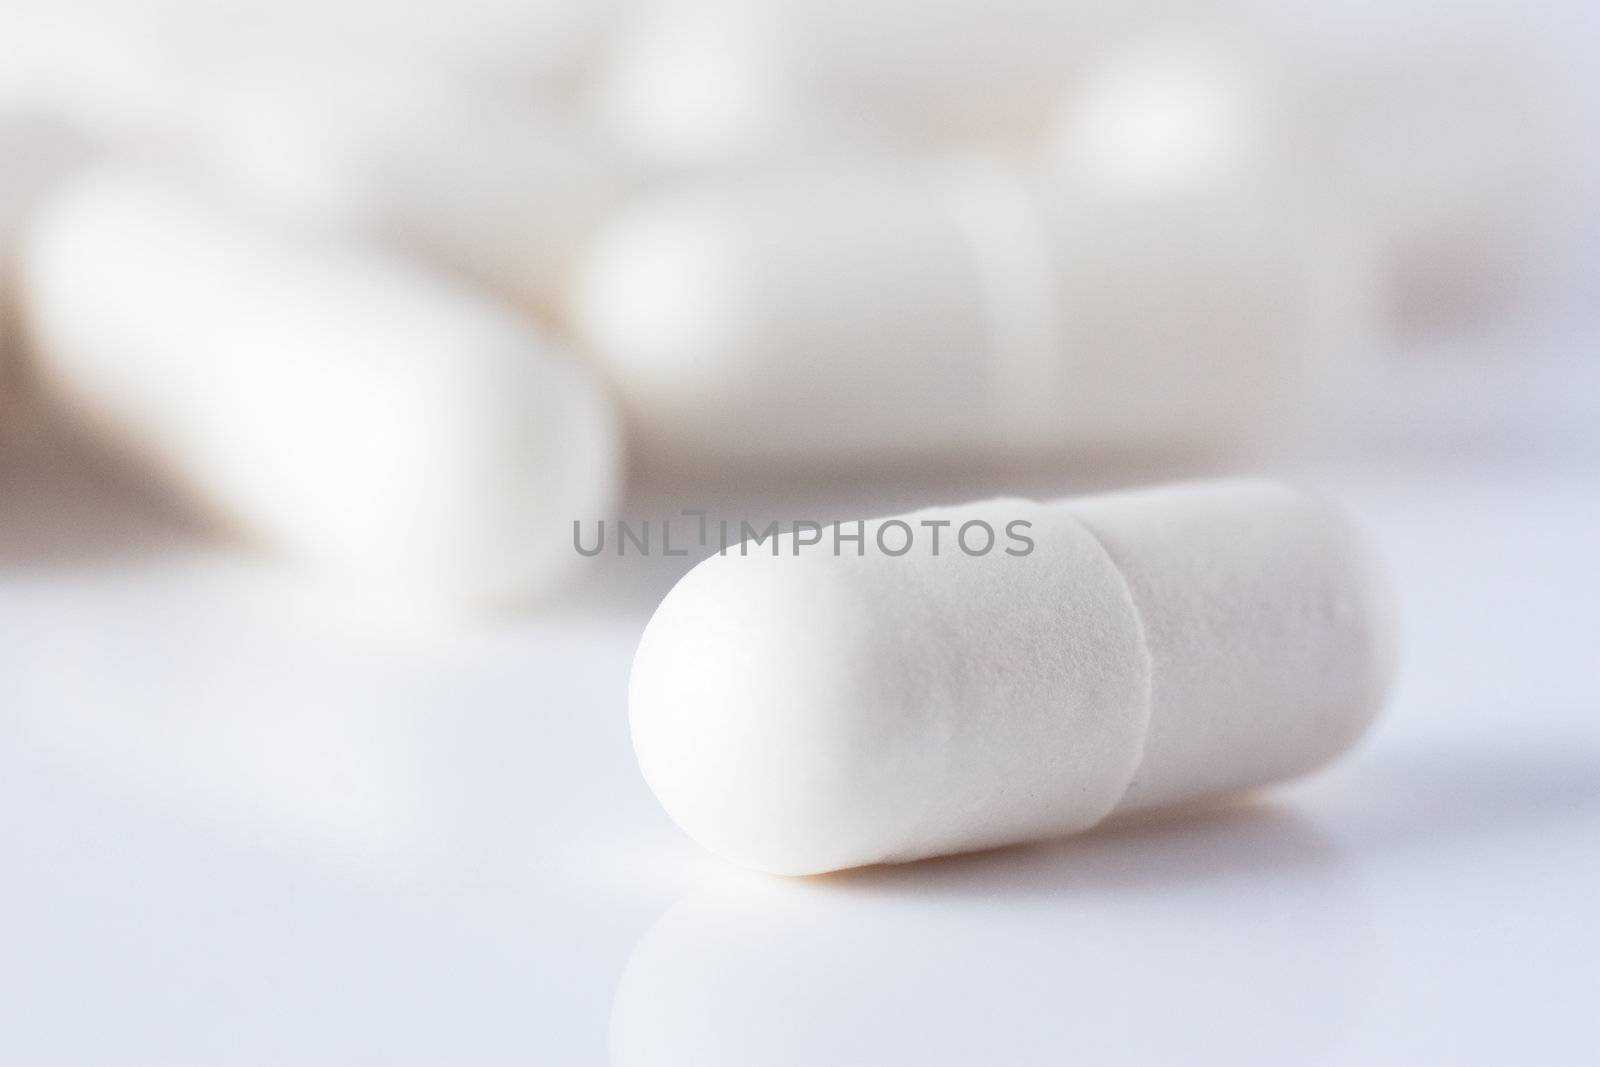 Macro shot of white capsuled pill and a heap of same pills defocused on background